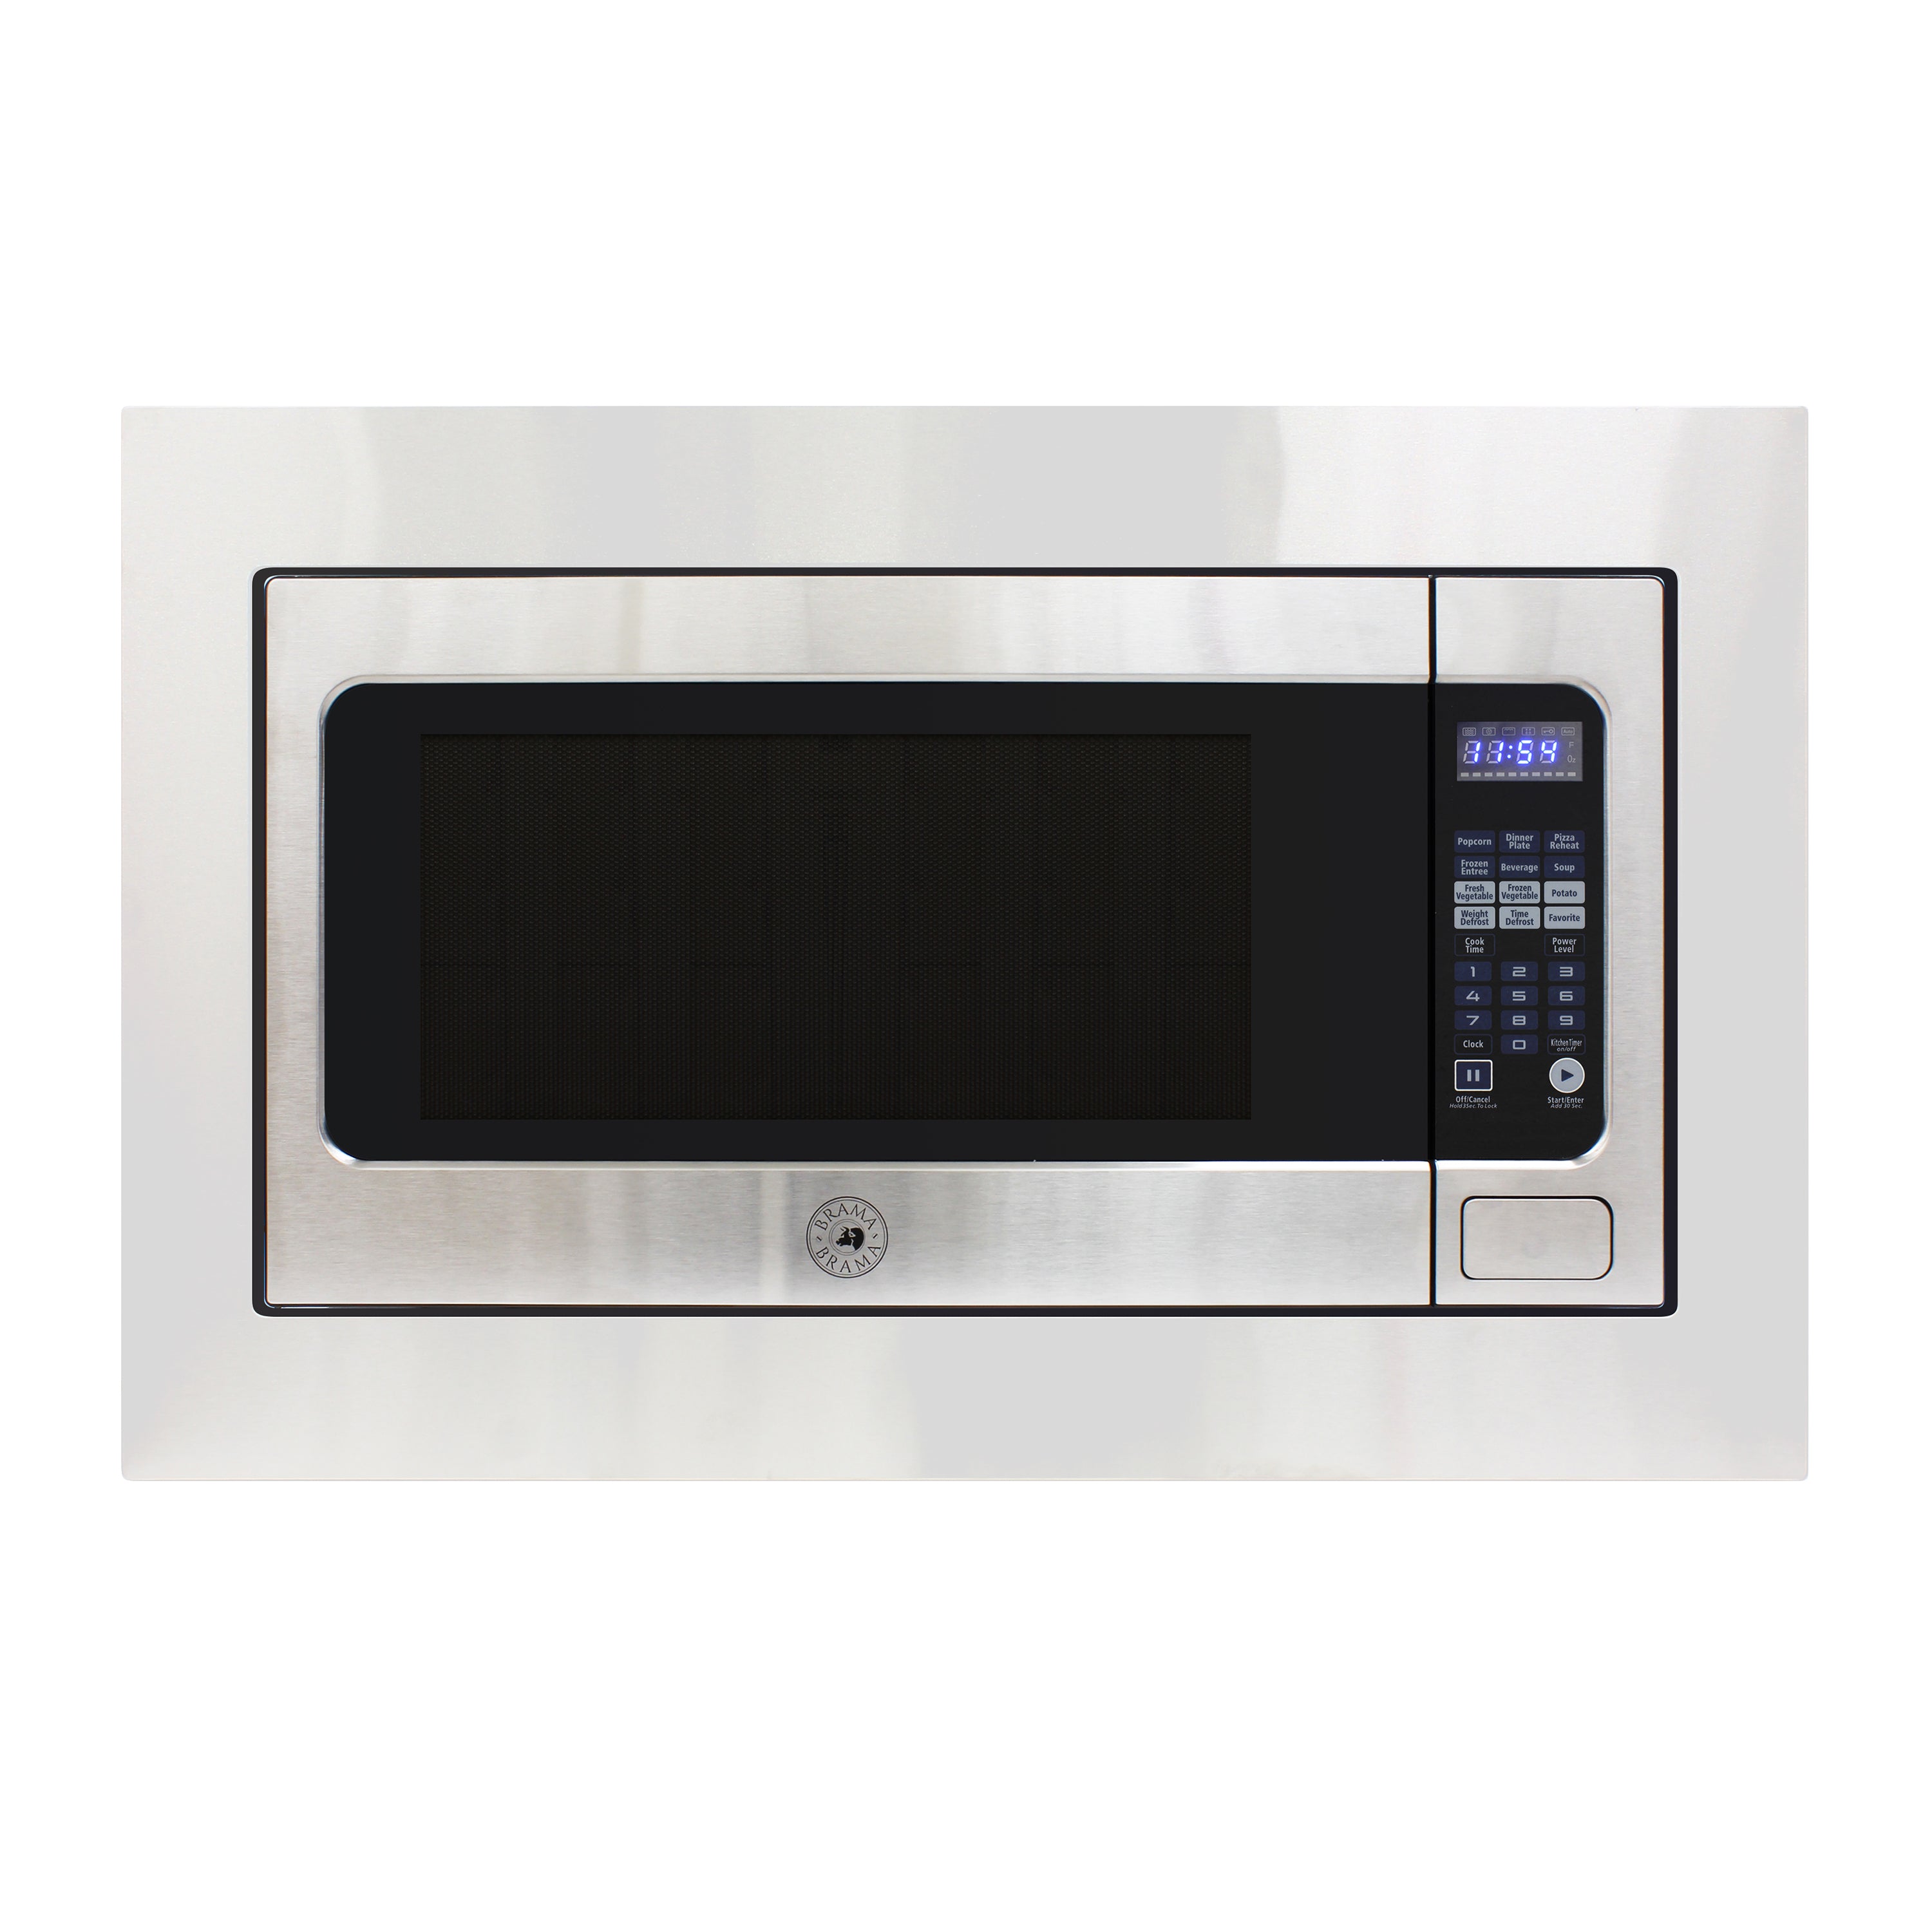 Vinotemp - BR-MW-BI22-S, Brama by Vinotemp 24" Built-In Microwave Oven with Trim Kit, 2.2 cu. ft. Capacity, in Stainless Steel